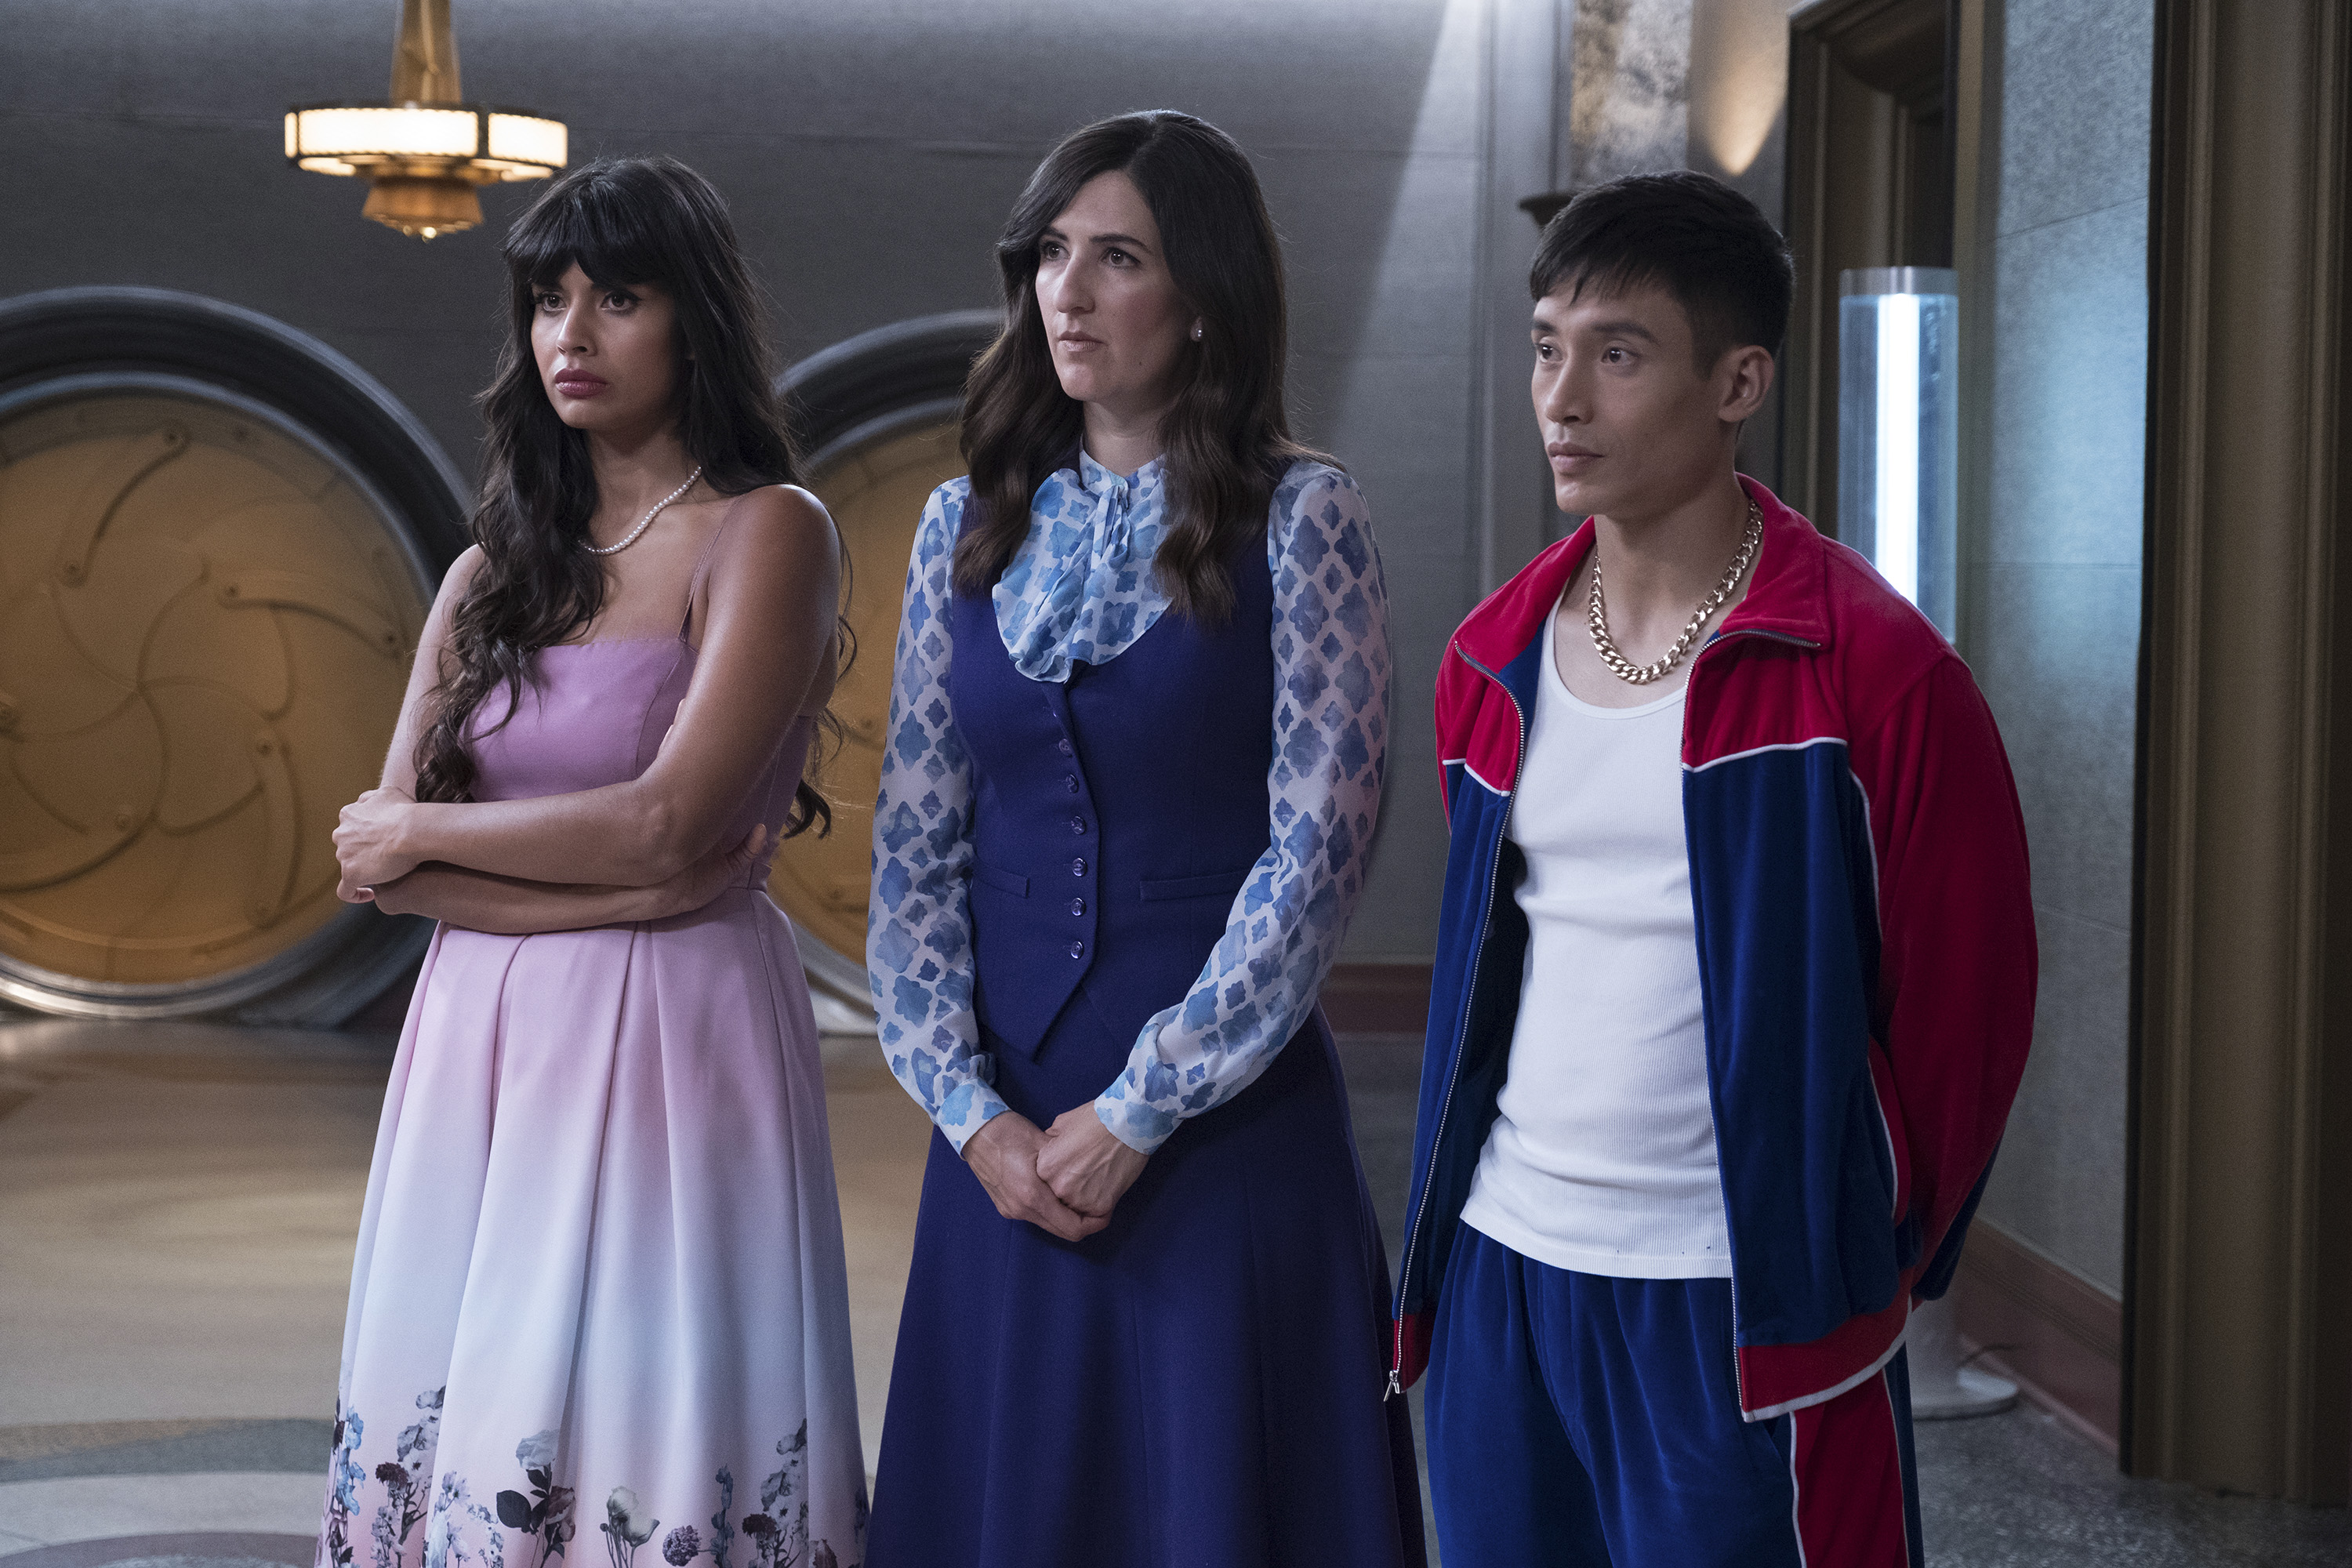 ‘The Good Place’: What’s Next for D’Arcy Carden, Jameela Jamil, and Manny Jacinto?